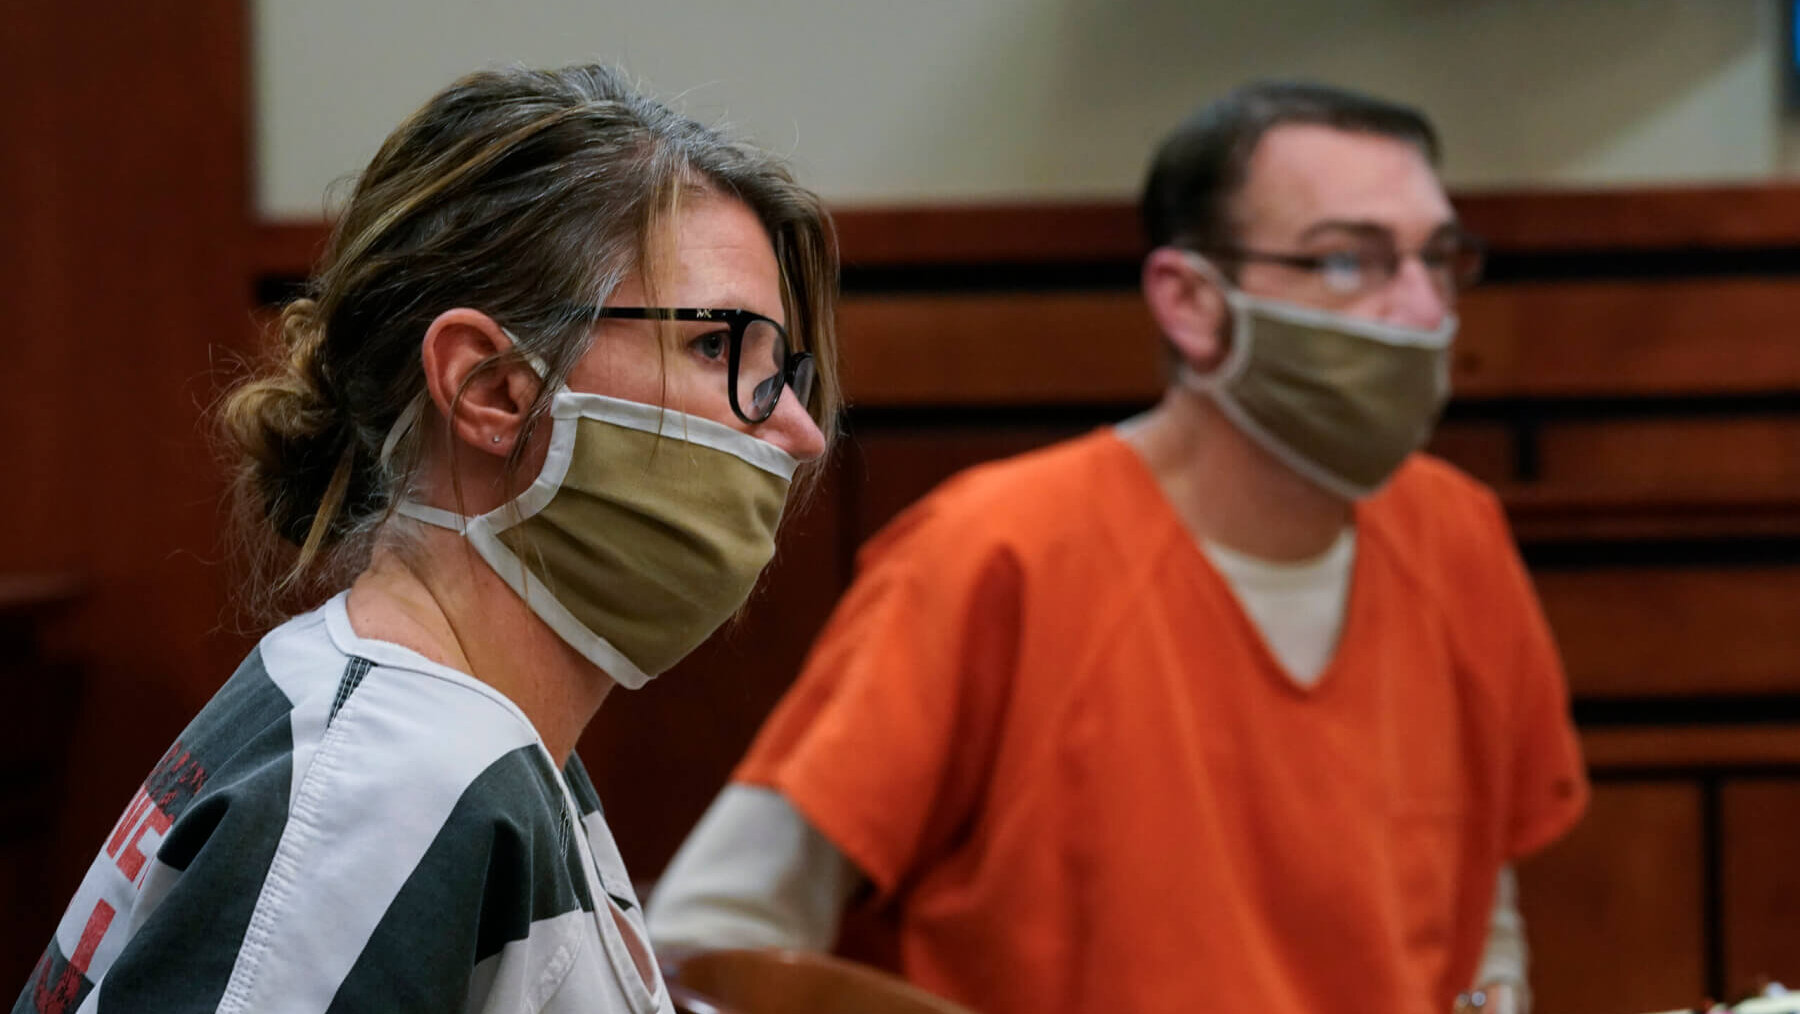 A man and woman in jail uniforms and face masks sit in court